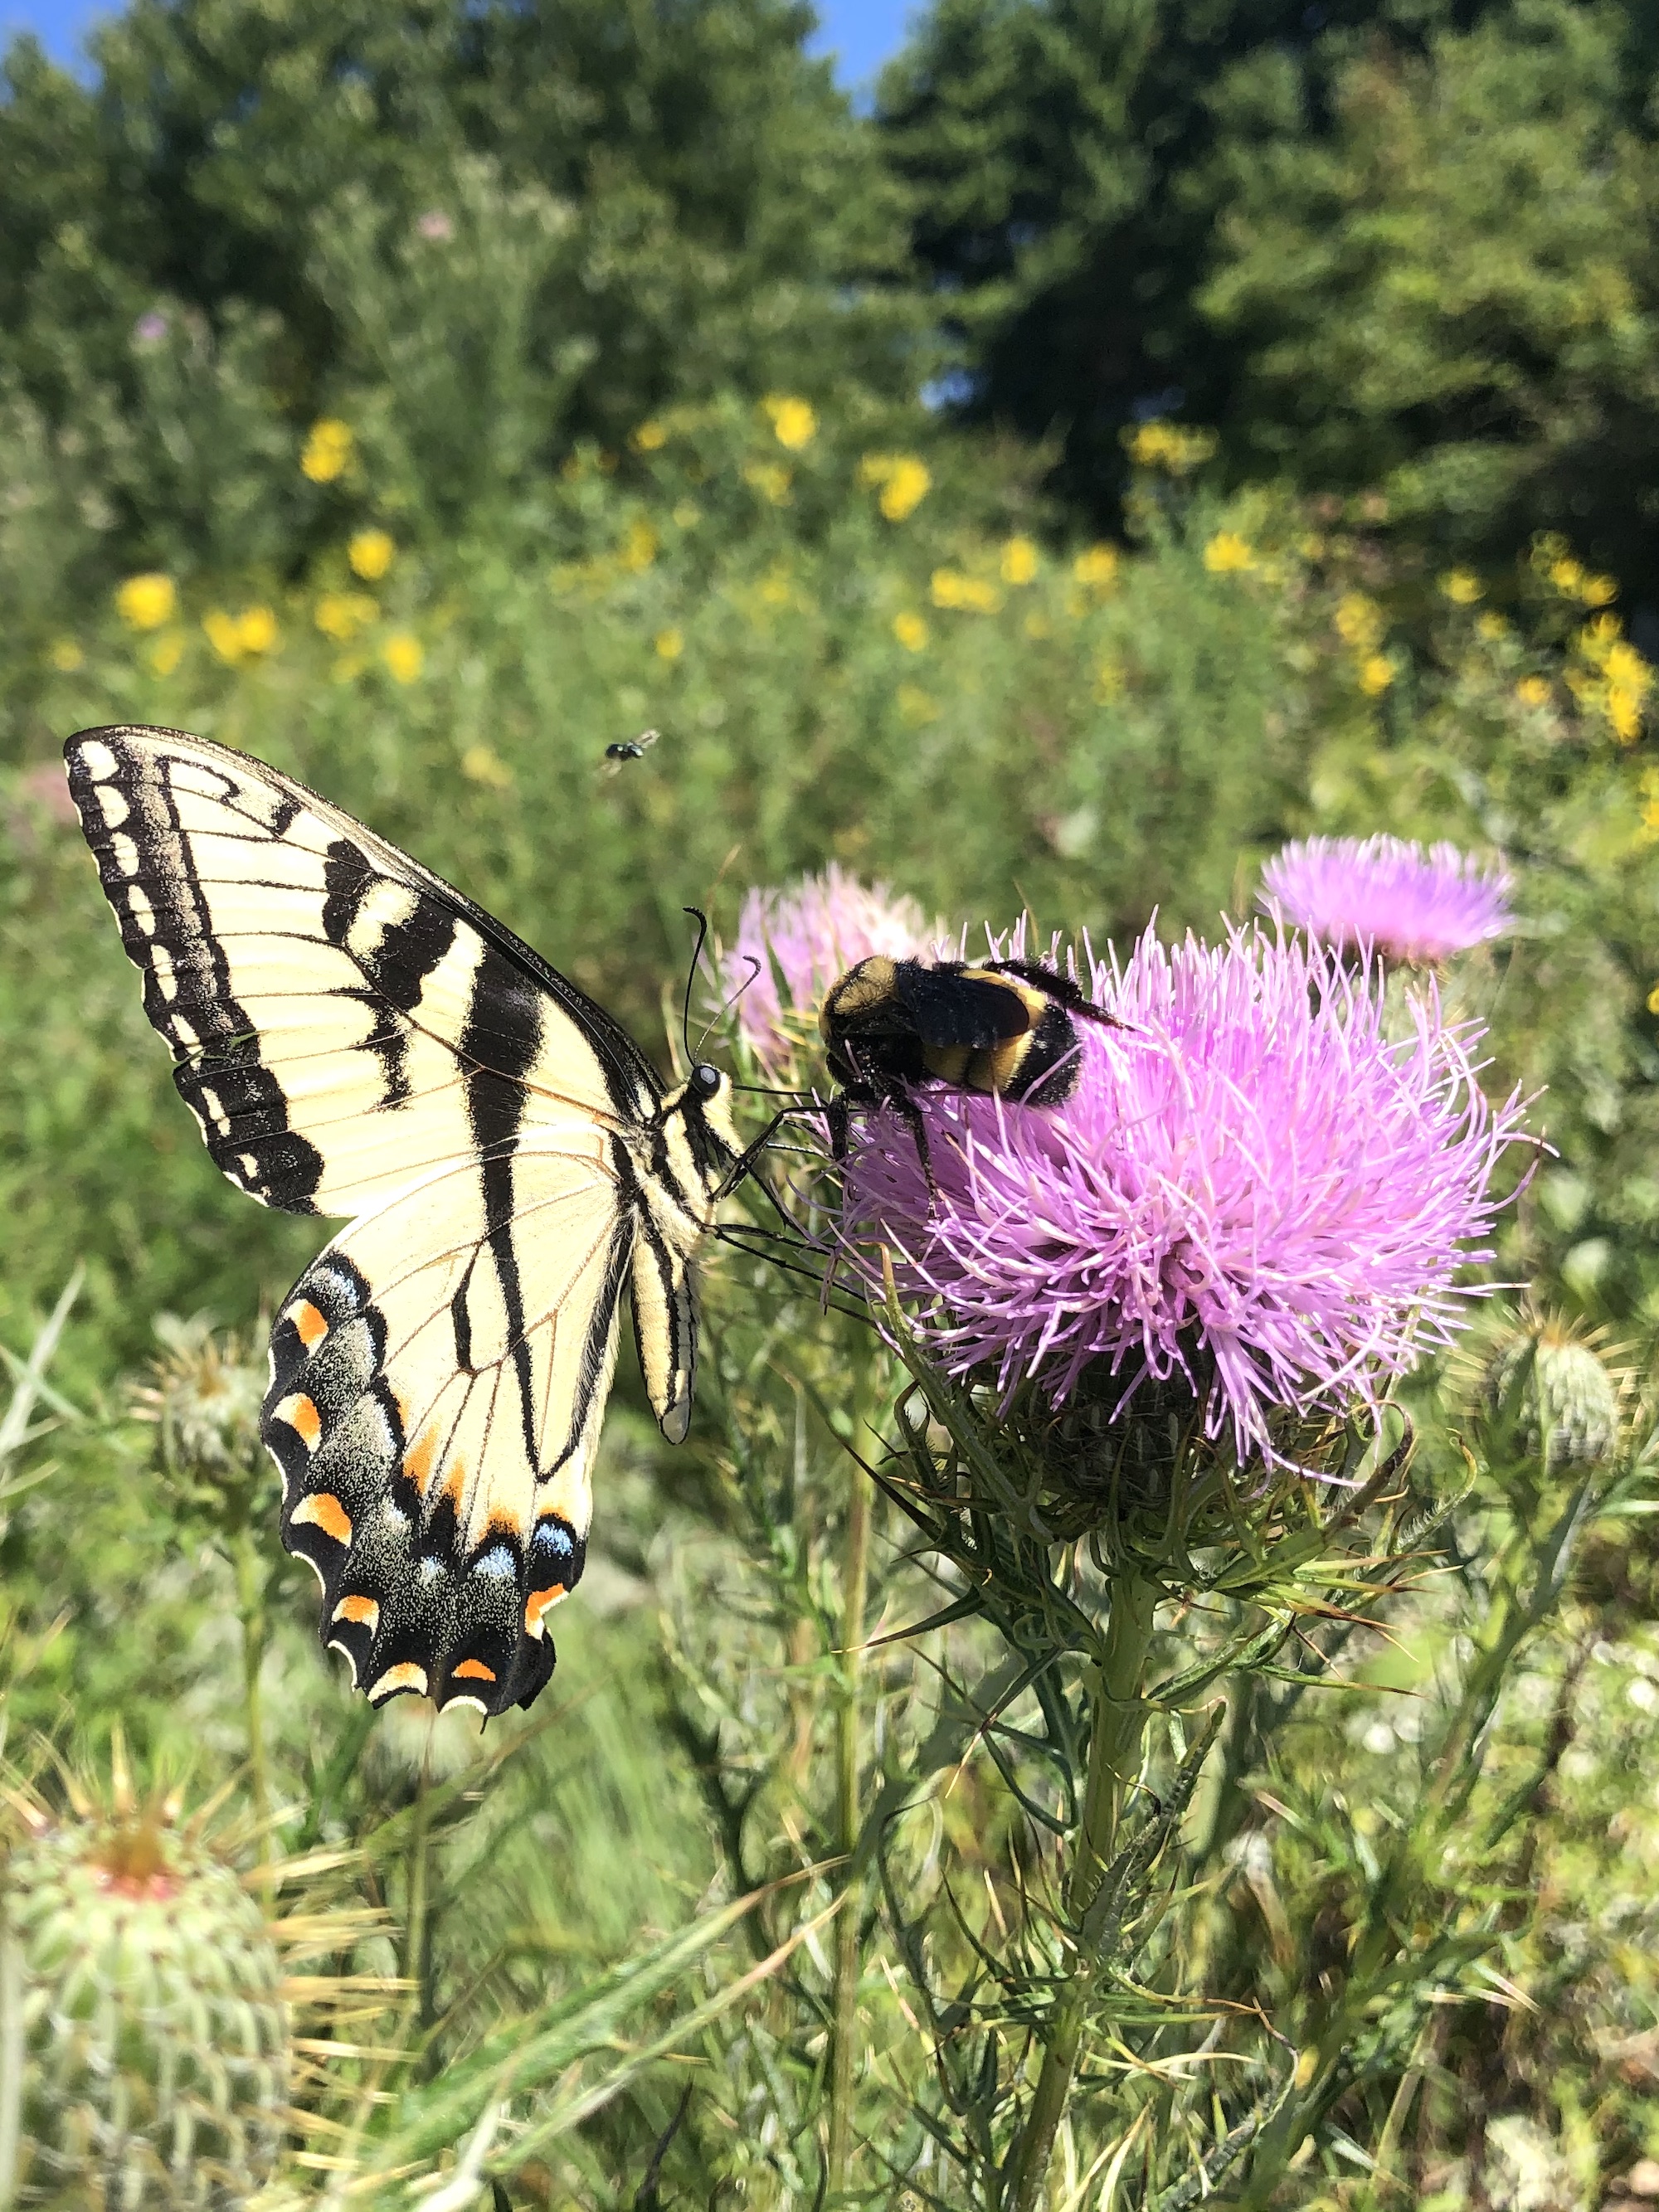 Eastern Swallowtail butterfly on Field Thistle near the Arboretum Visitor's Center in Madison, Wisconsin on August 16, 2020.